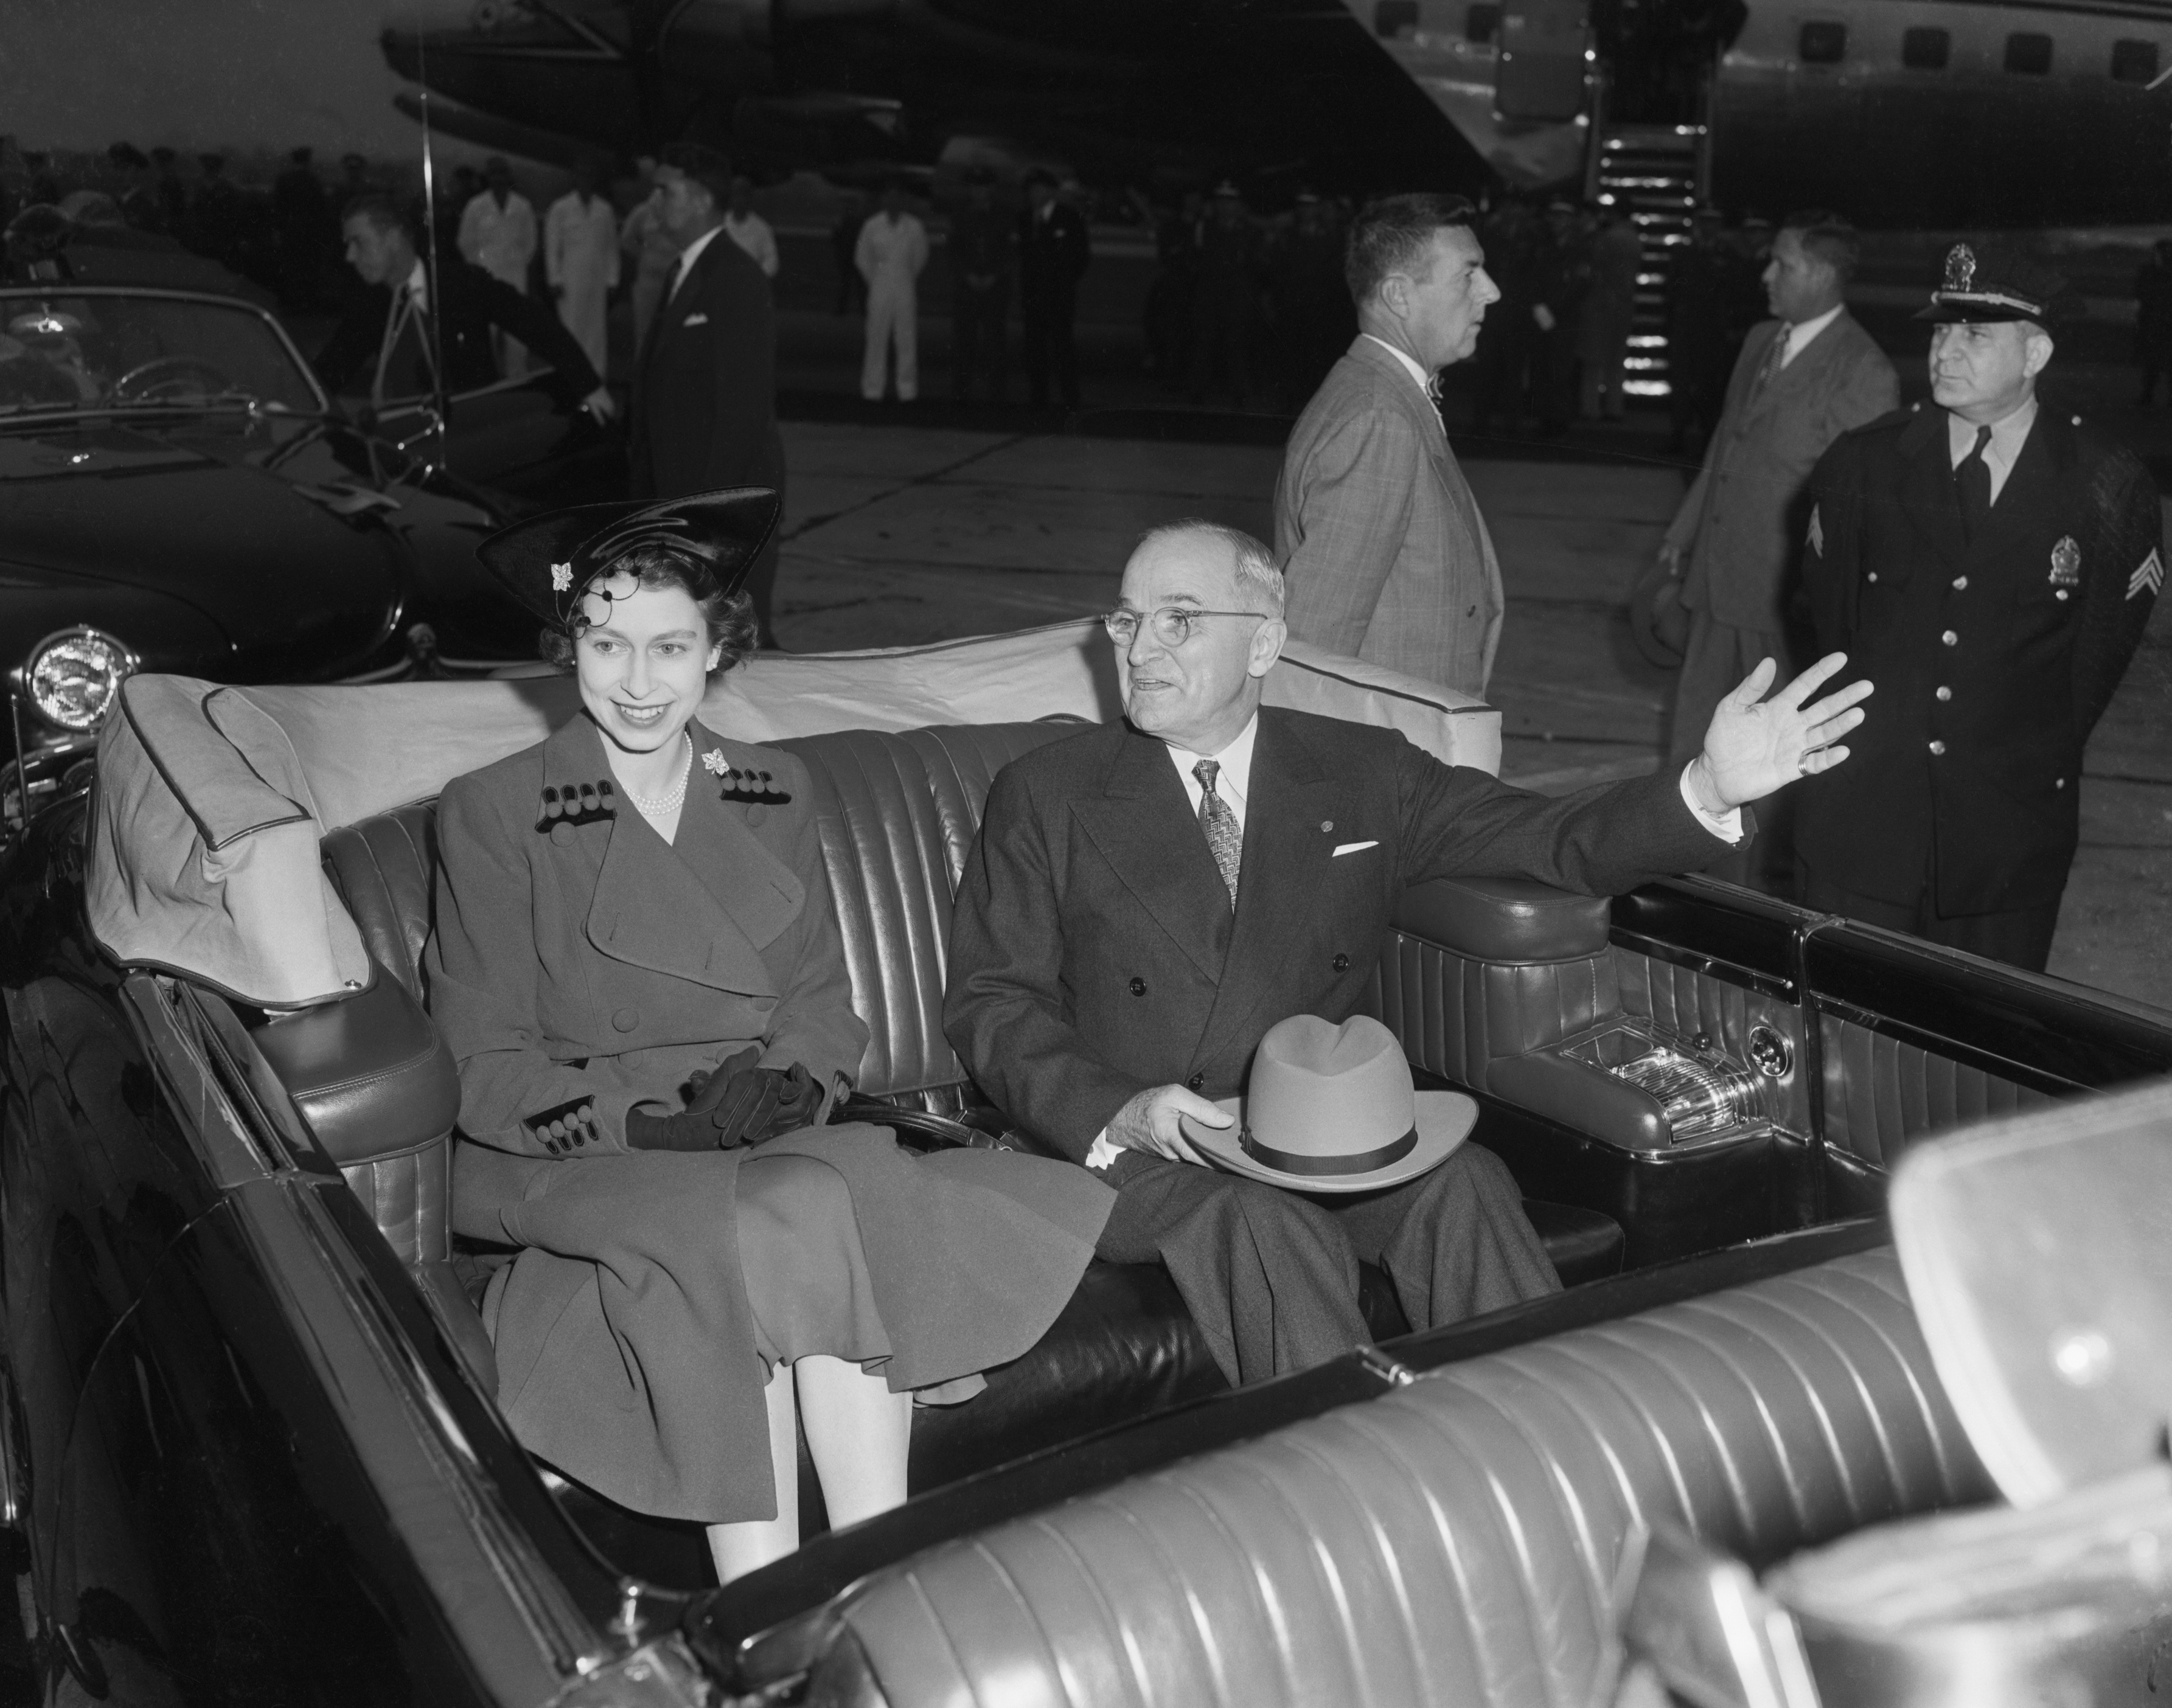 <p>President Harry S. Truman and Britain's Princess Elizabeth (later Queen Elizabeth II) were photographed as their motorcade got underway following a reception ceremony at Washington National Airport in Washington, D.C., on Oct. 31, 1951. It marked the future monarch's first trip to America.</p>